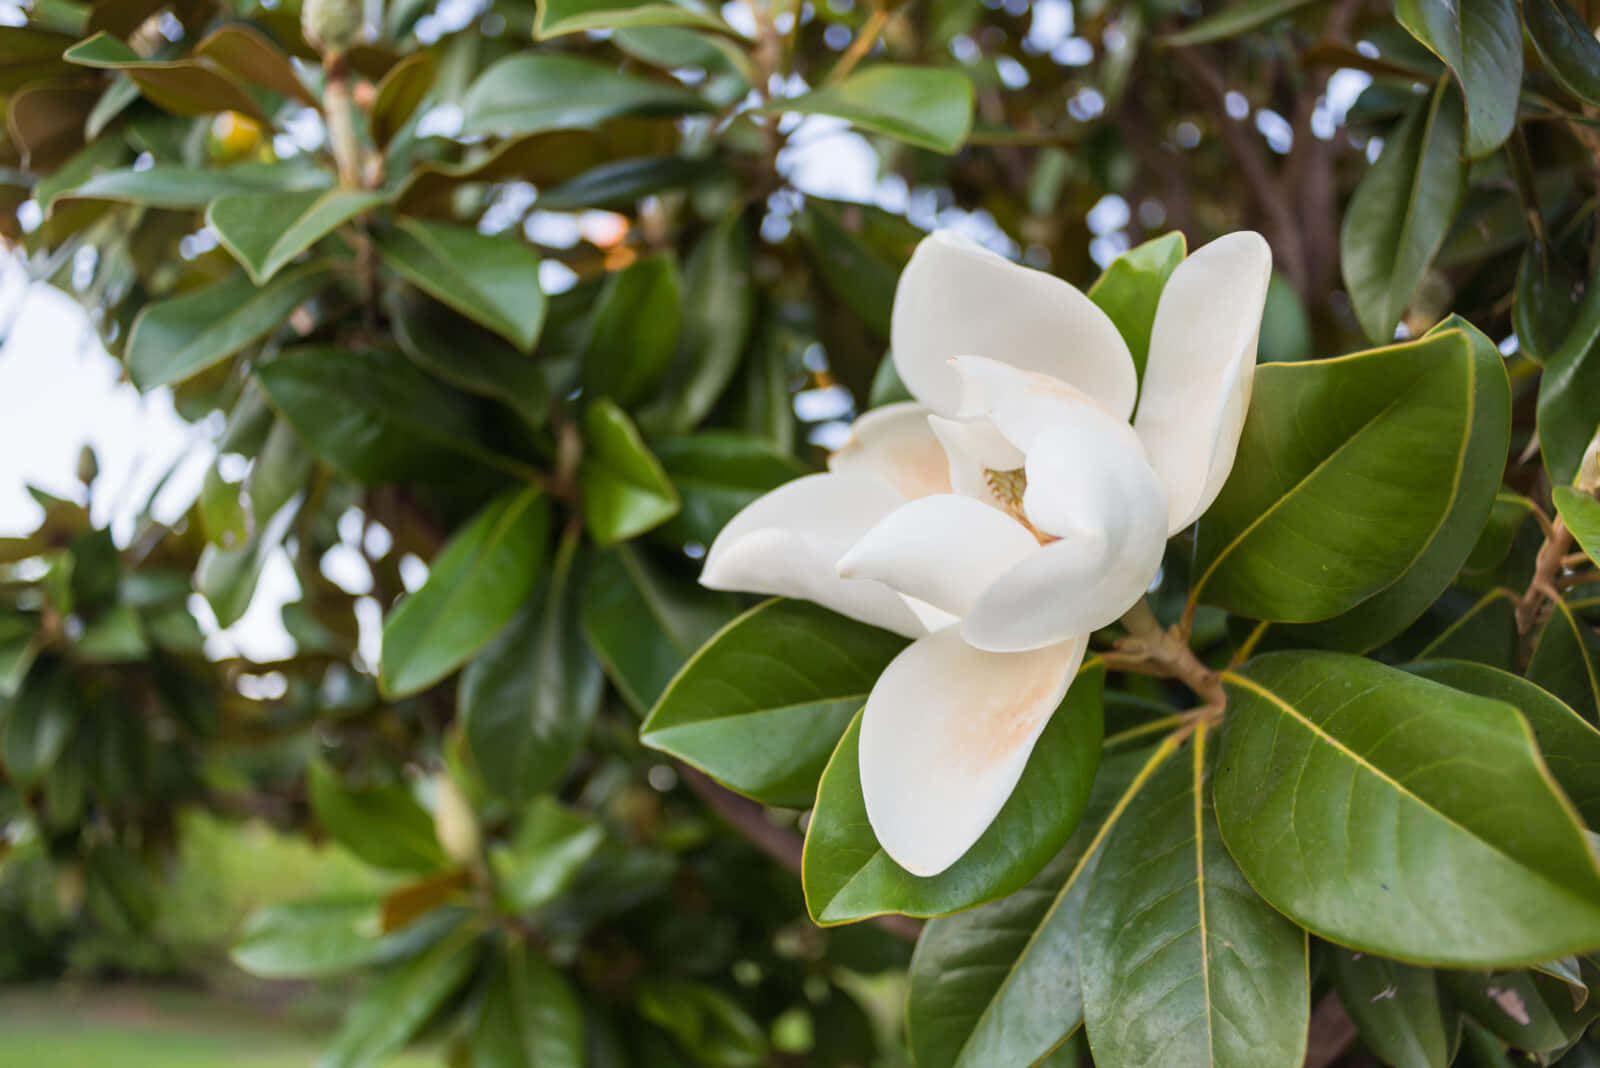 A beautiful magnolia flower, showing off its stunning white petals